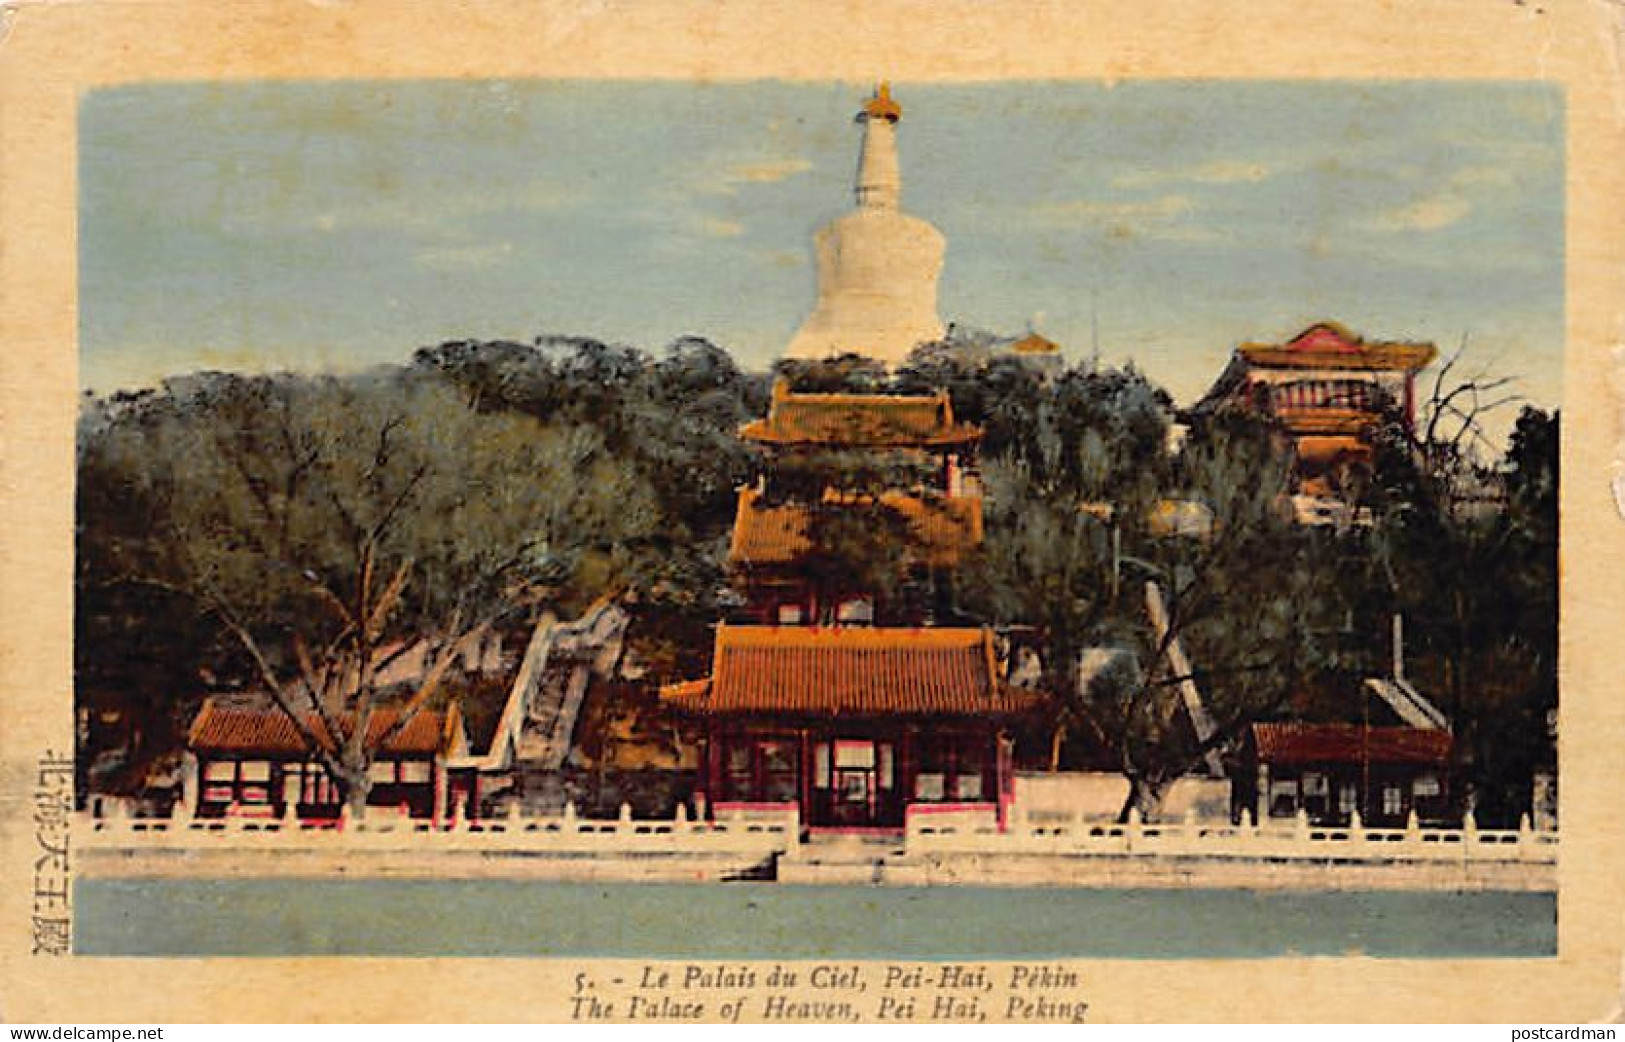 China - BEIJING - The Temple Of Heaven - Publ. Unknown 5 - Cina